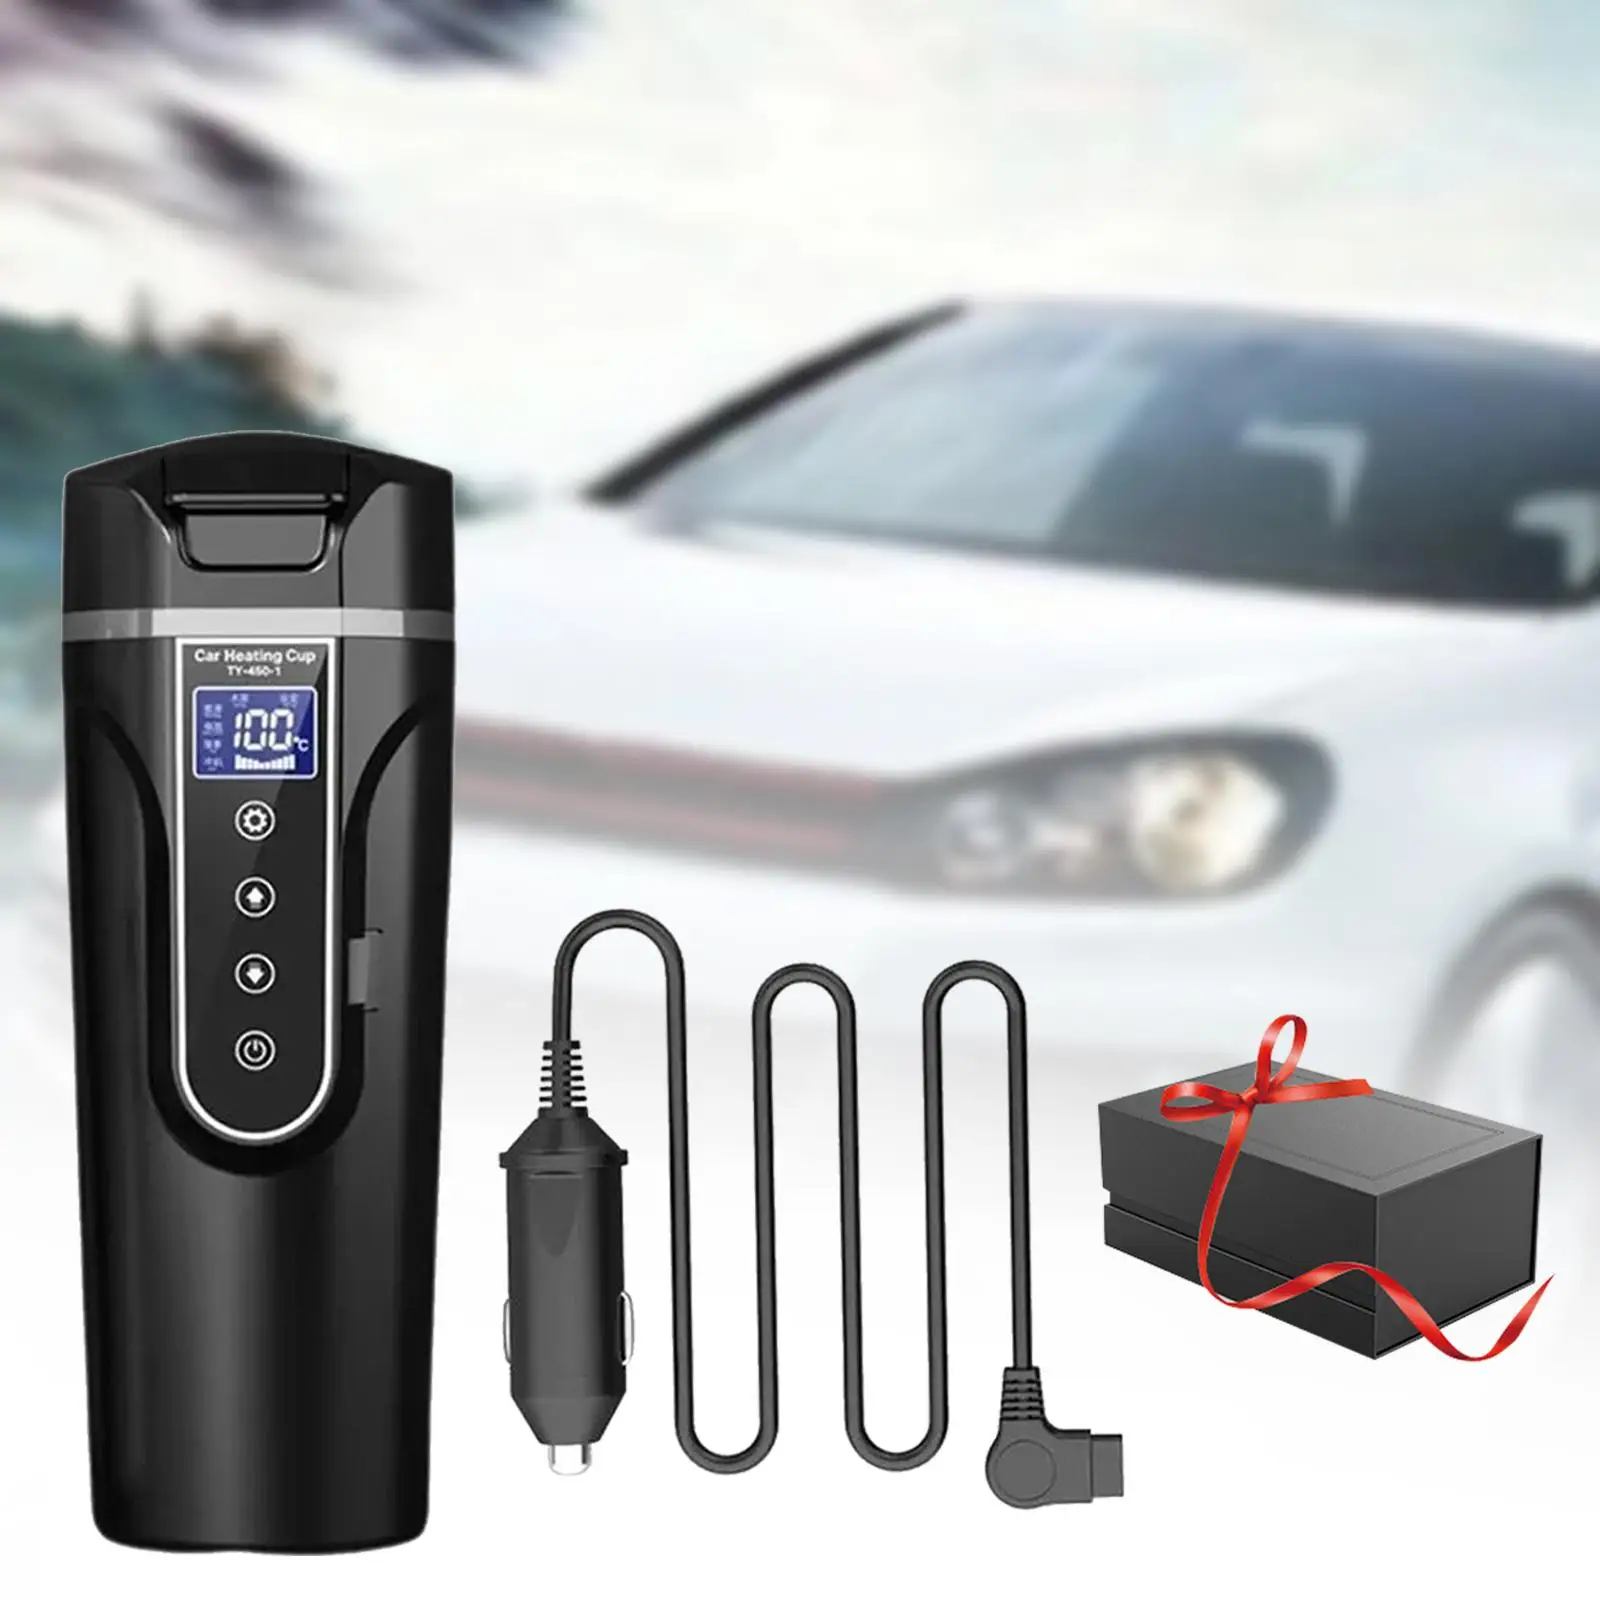 Car Heating Cup Variable Temp Control 24V/12V Car Traveling Kettle for Vehicles Auto Car Camping Airplane Tea Coffee Water Milk